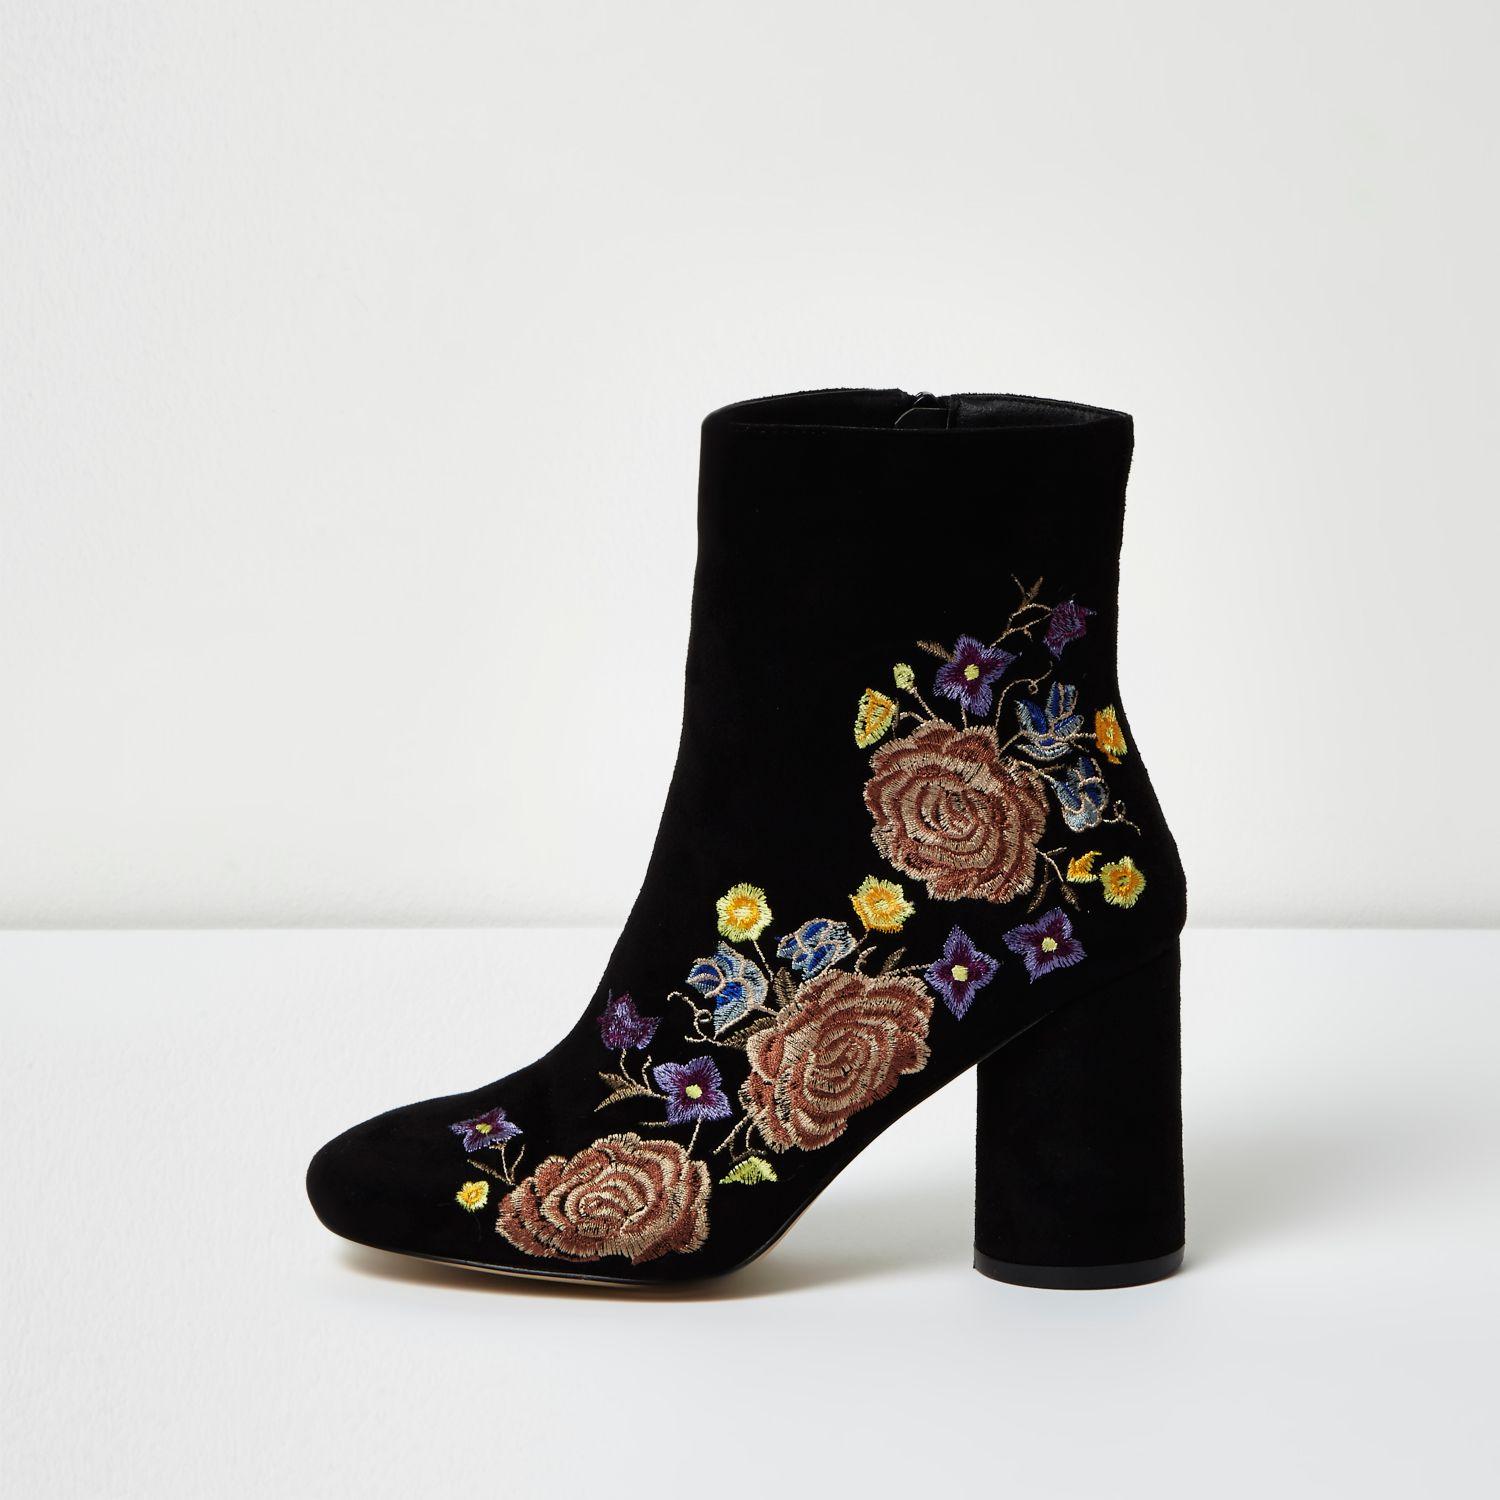 River island Black Embroidered Floral Ankle Boots in Black | Lyst